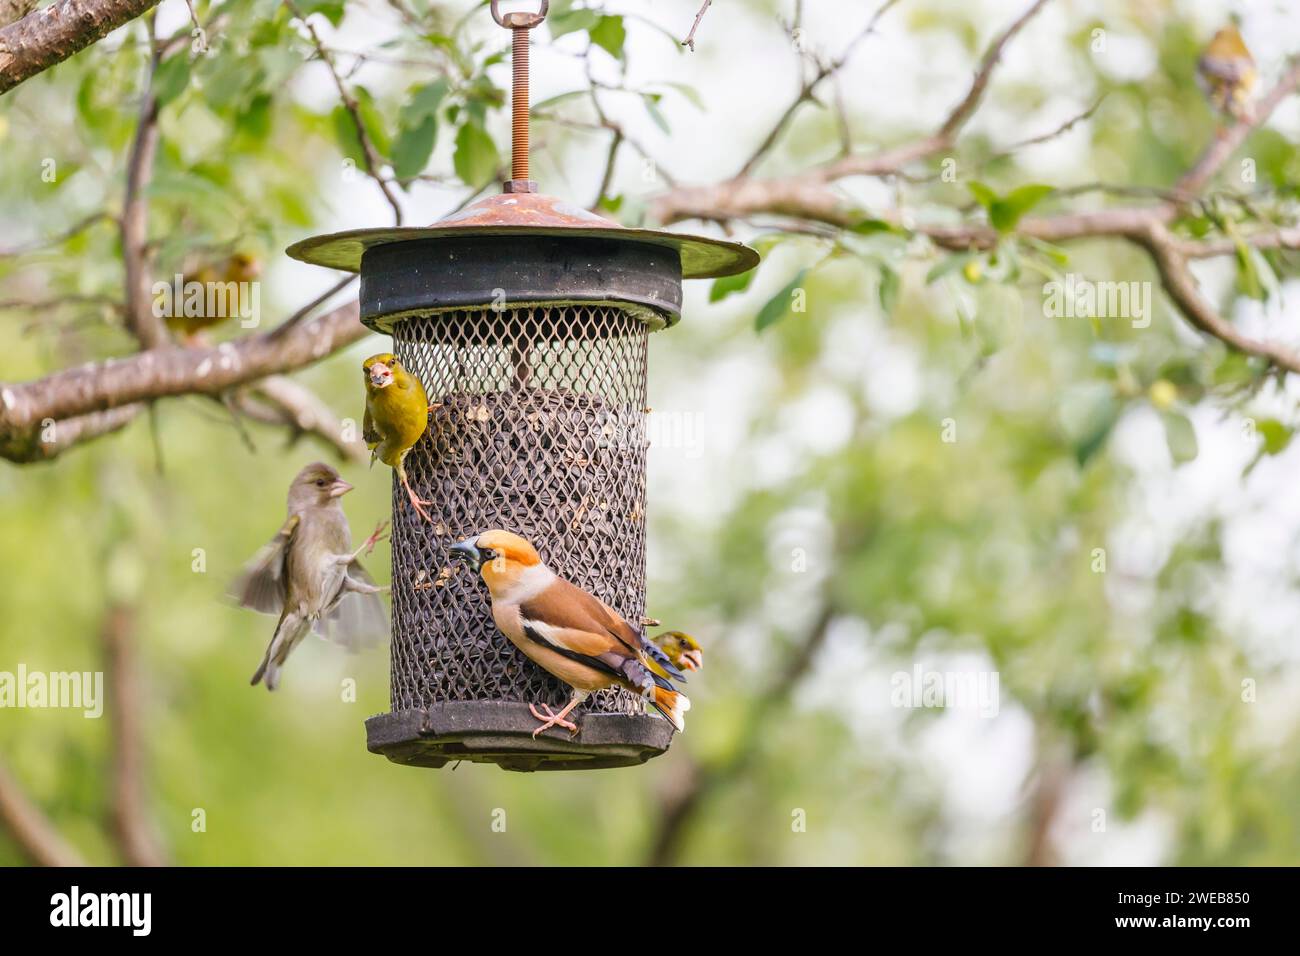 A hawfinch (Coccothraustes coccothraustes) and siskins (Carduelis spinus) at a bird feeder, in Koros-Maros National Park, Hungary Stock Photo